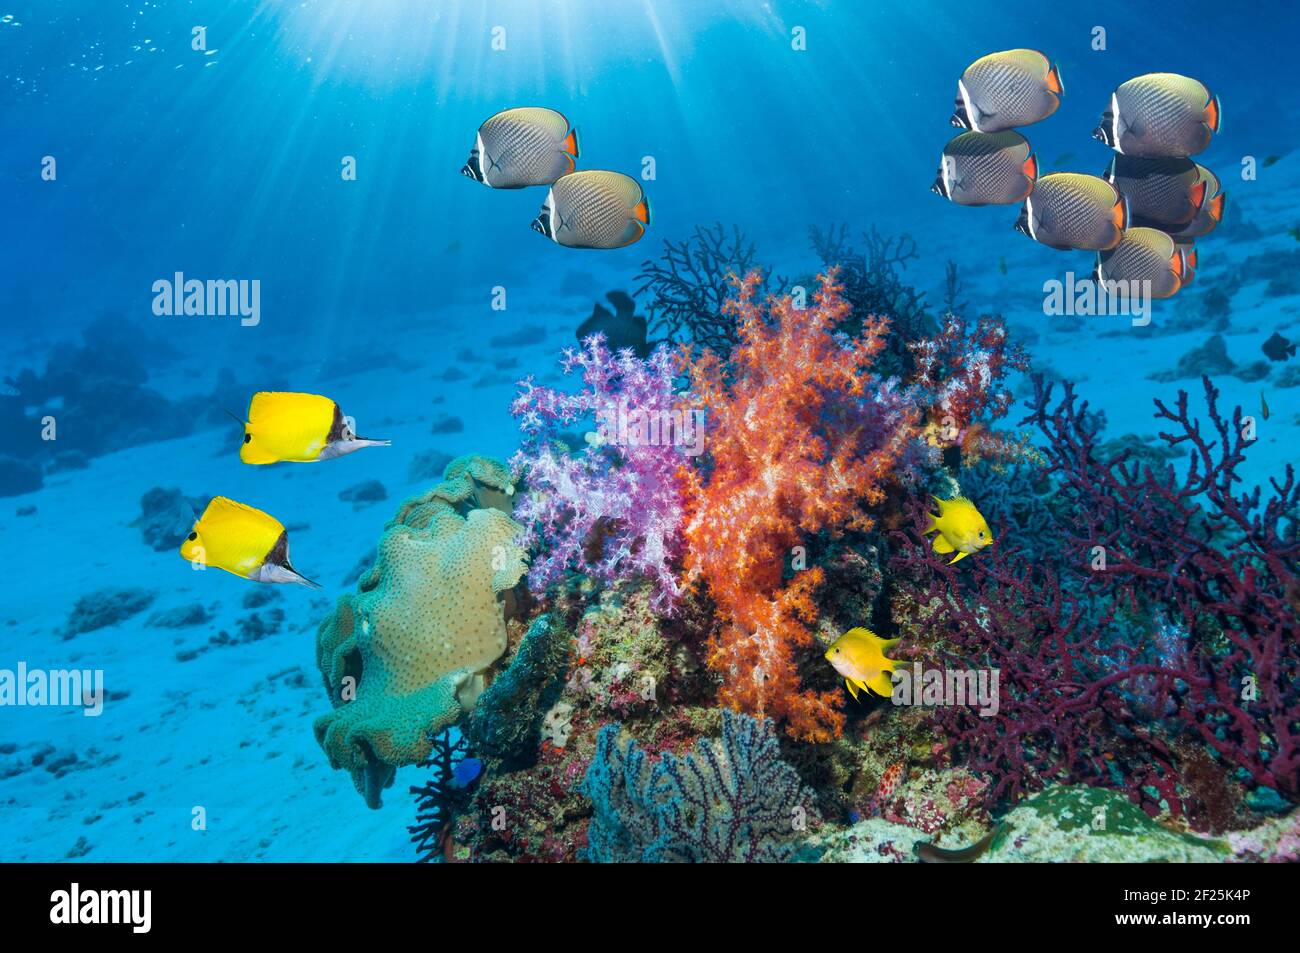 Coral reef scenery with a pair of Long-nosed butterflyfish (Forcipiger flavissimus), Golden damselfish [Amblyglyphidodon aureus] and Redtail or Collar Stock Photo